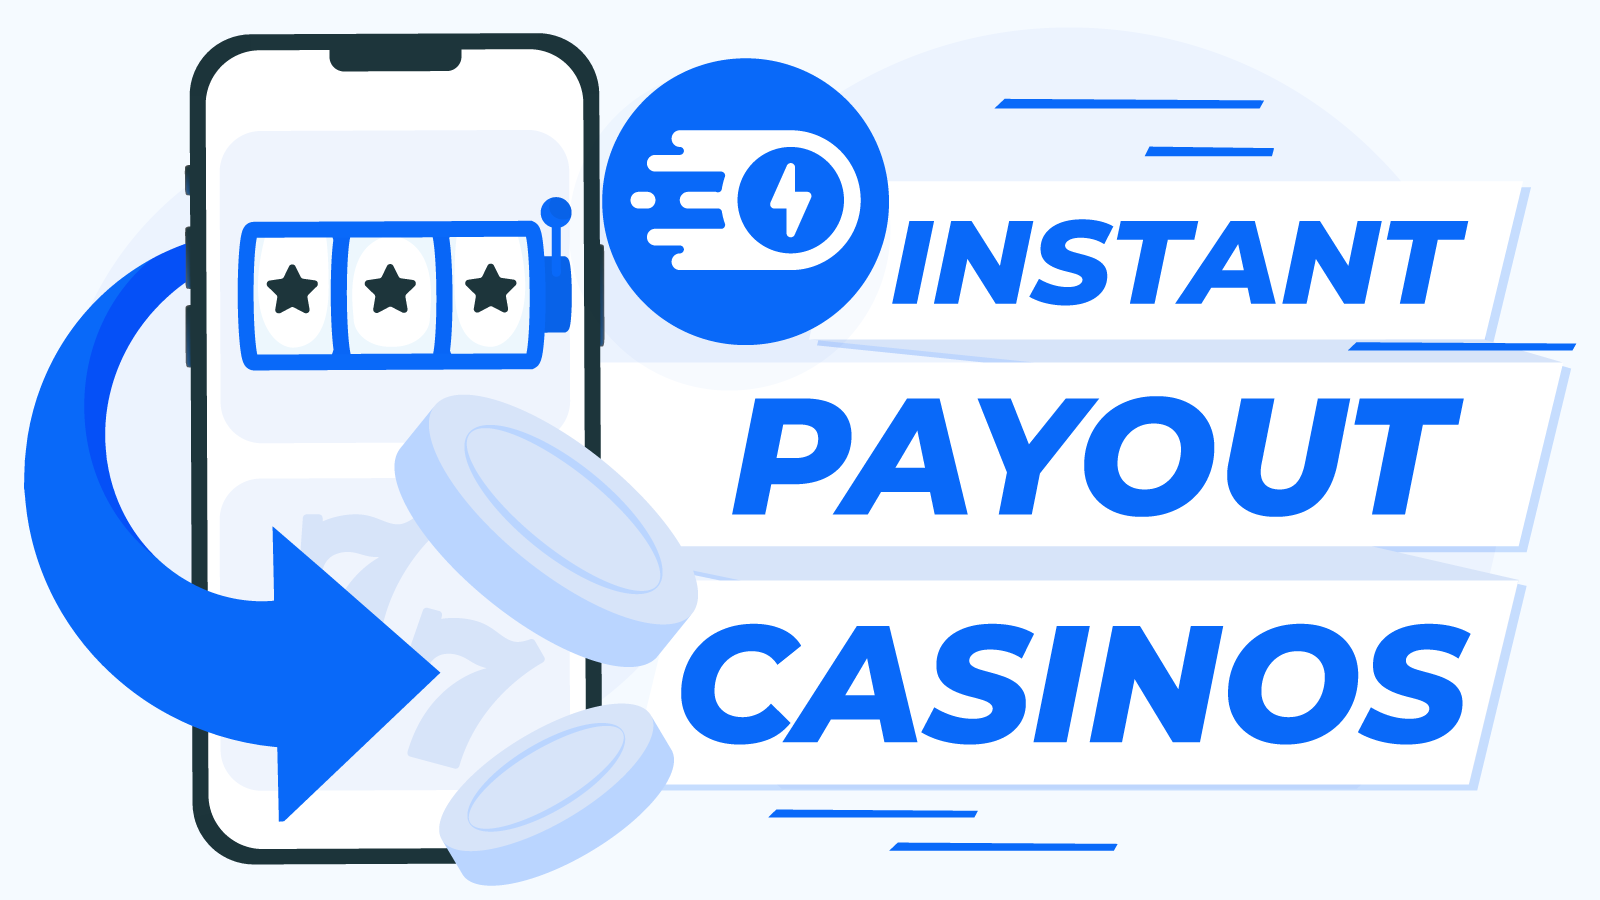 best online casino fast payout